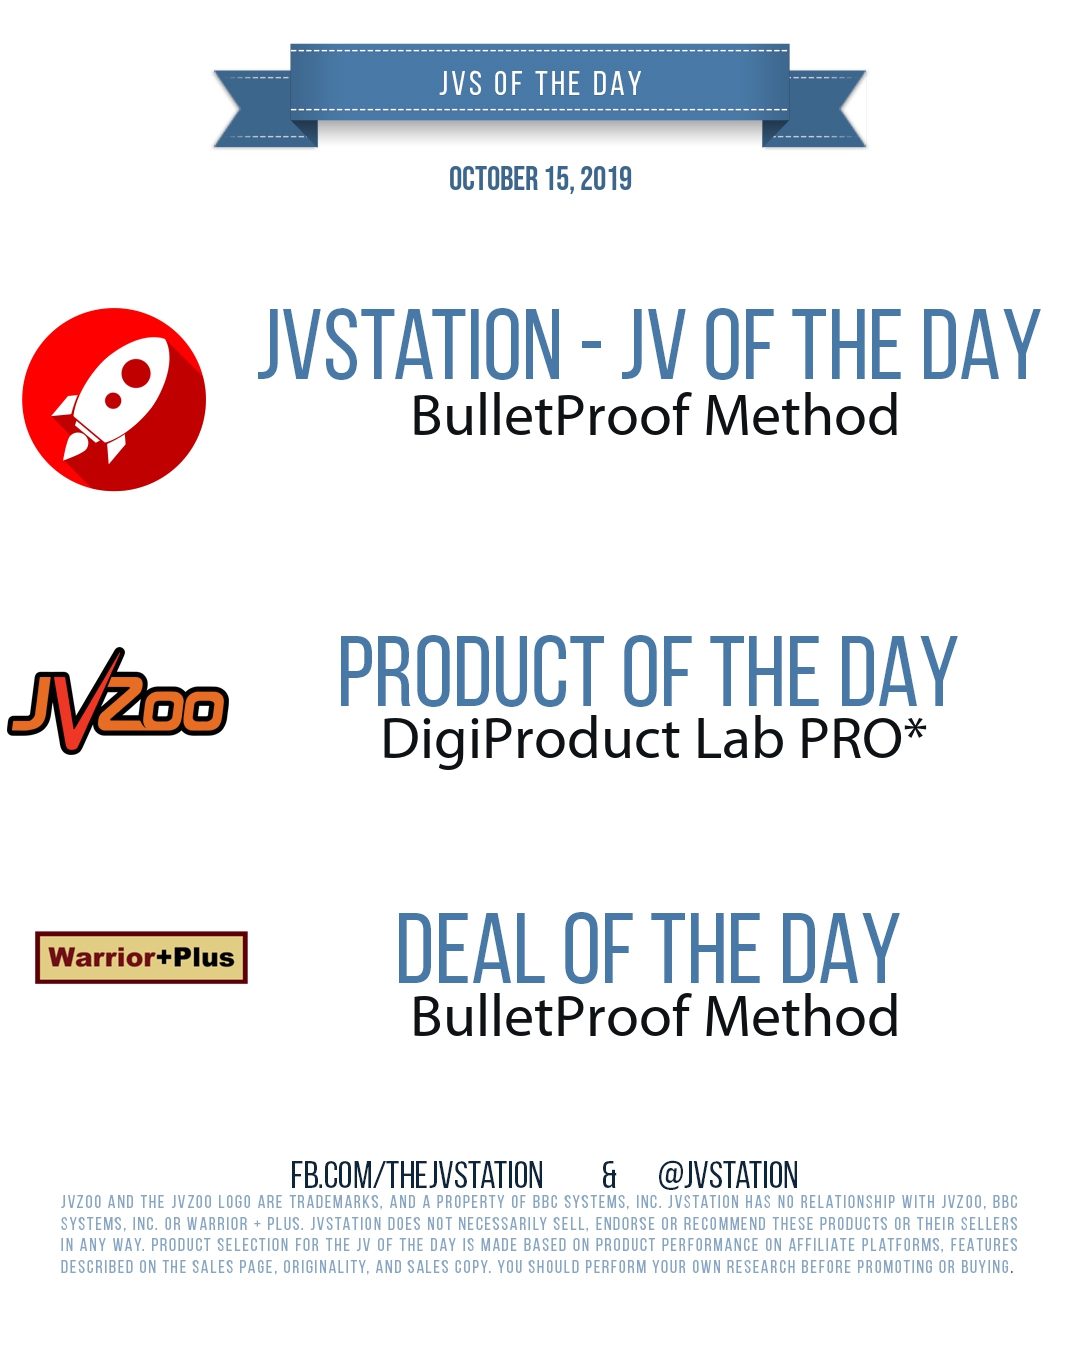 JVs of the day - October 15, 2019